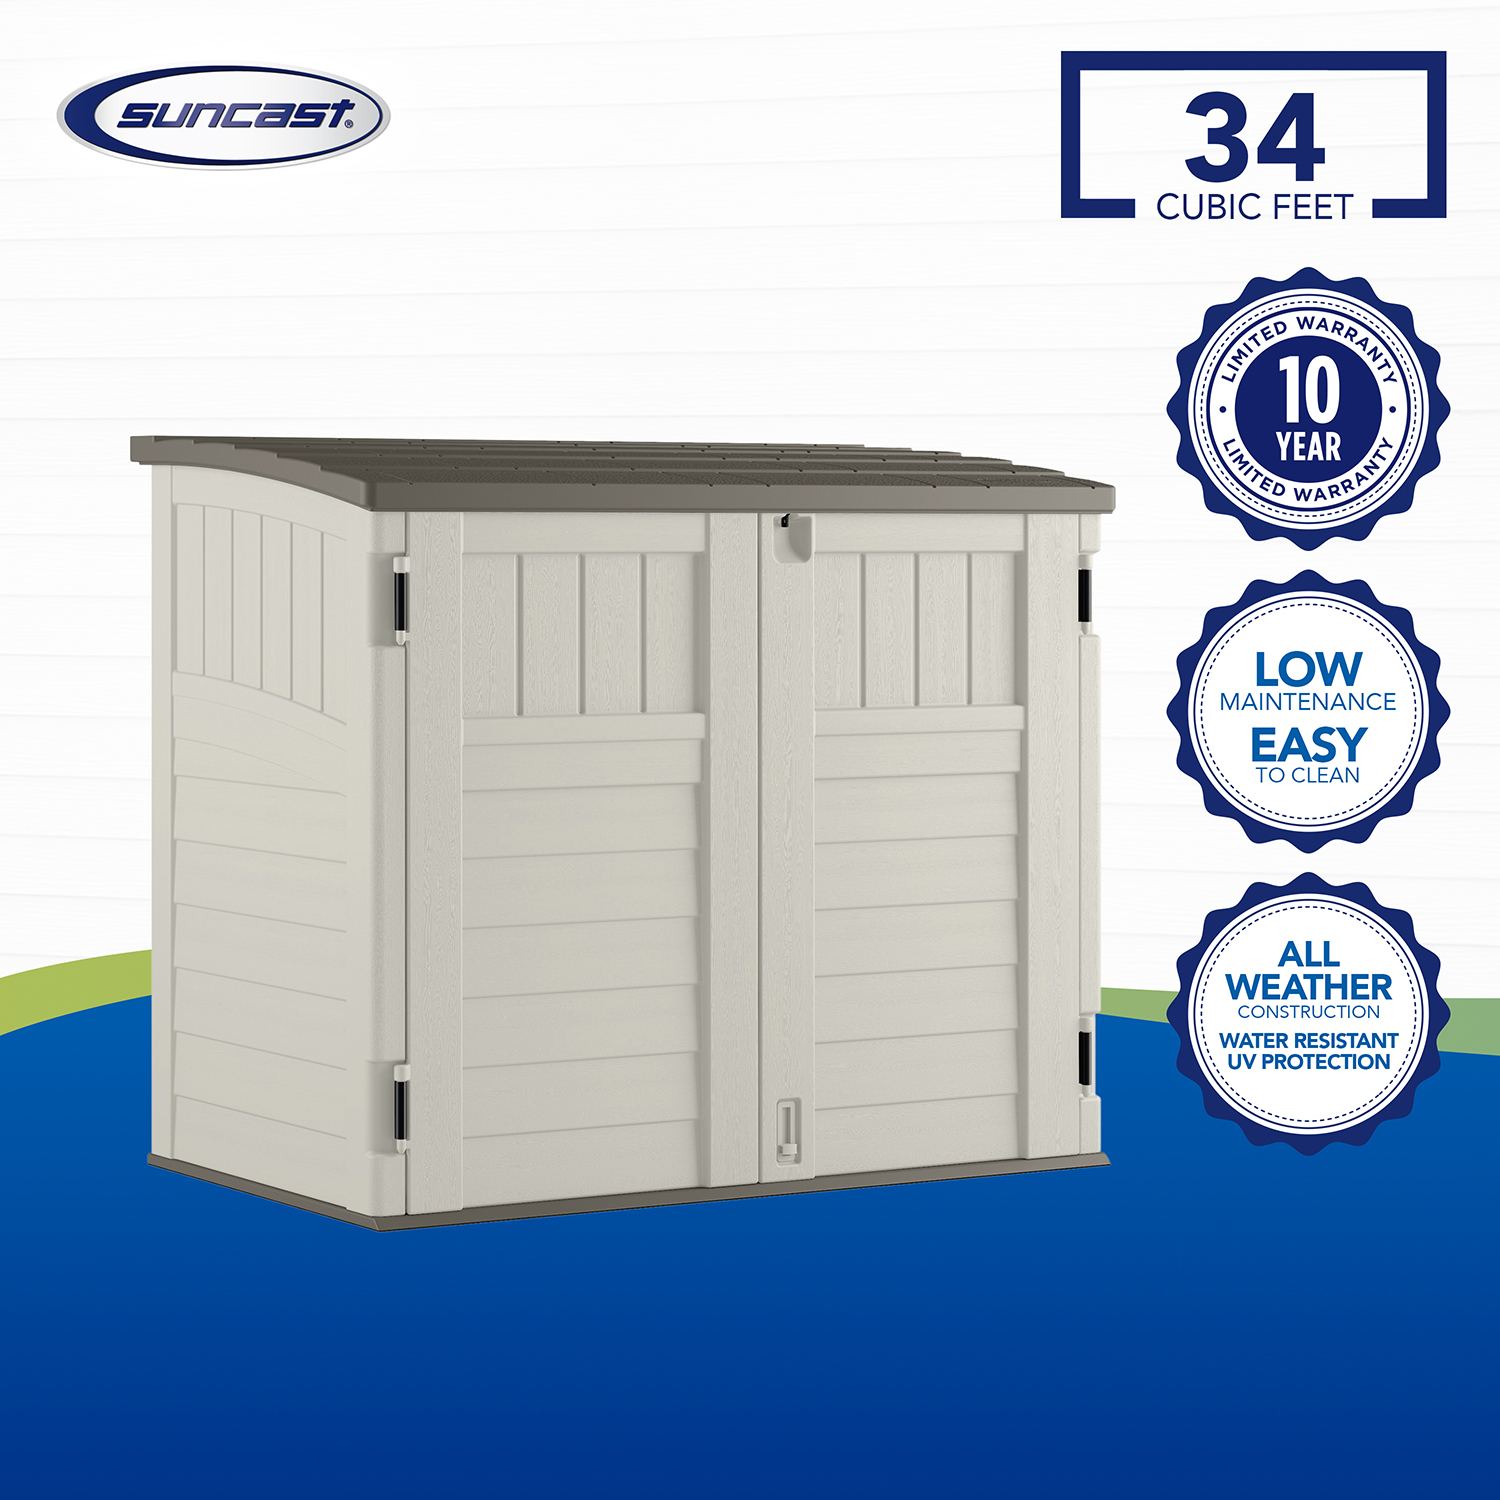 Suncast 34 cu. ft. Horizontal Outdoor Resin Storage Shed, Vanilla, 53 in D x 45.5 in H x 32.25 in W - image 5 of 10